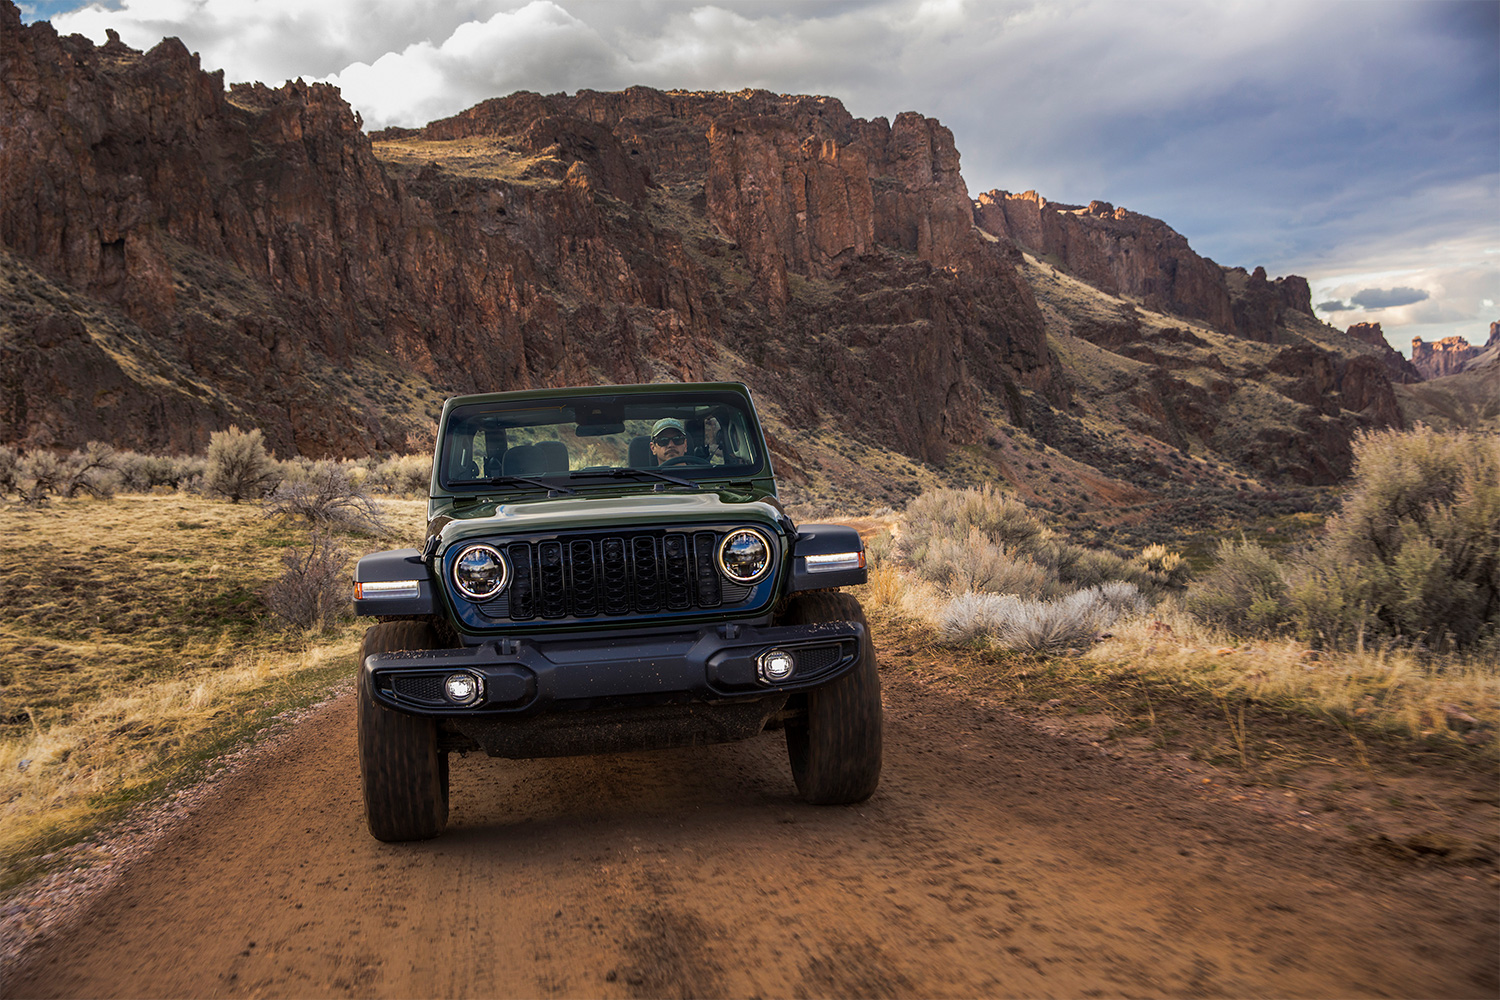 Two-door Jeep Wrangler Sport, our pick for the best affordable off-road vehicle